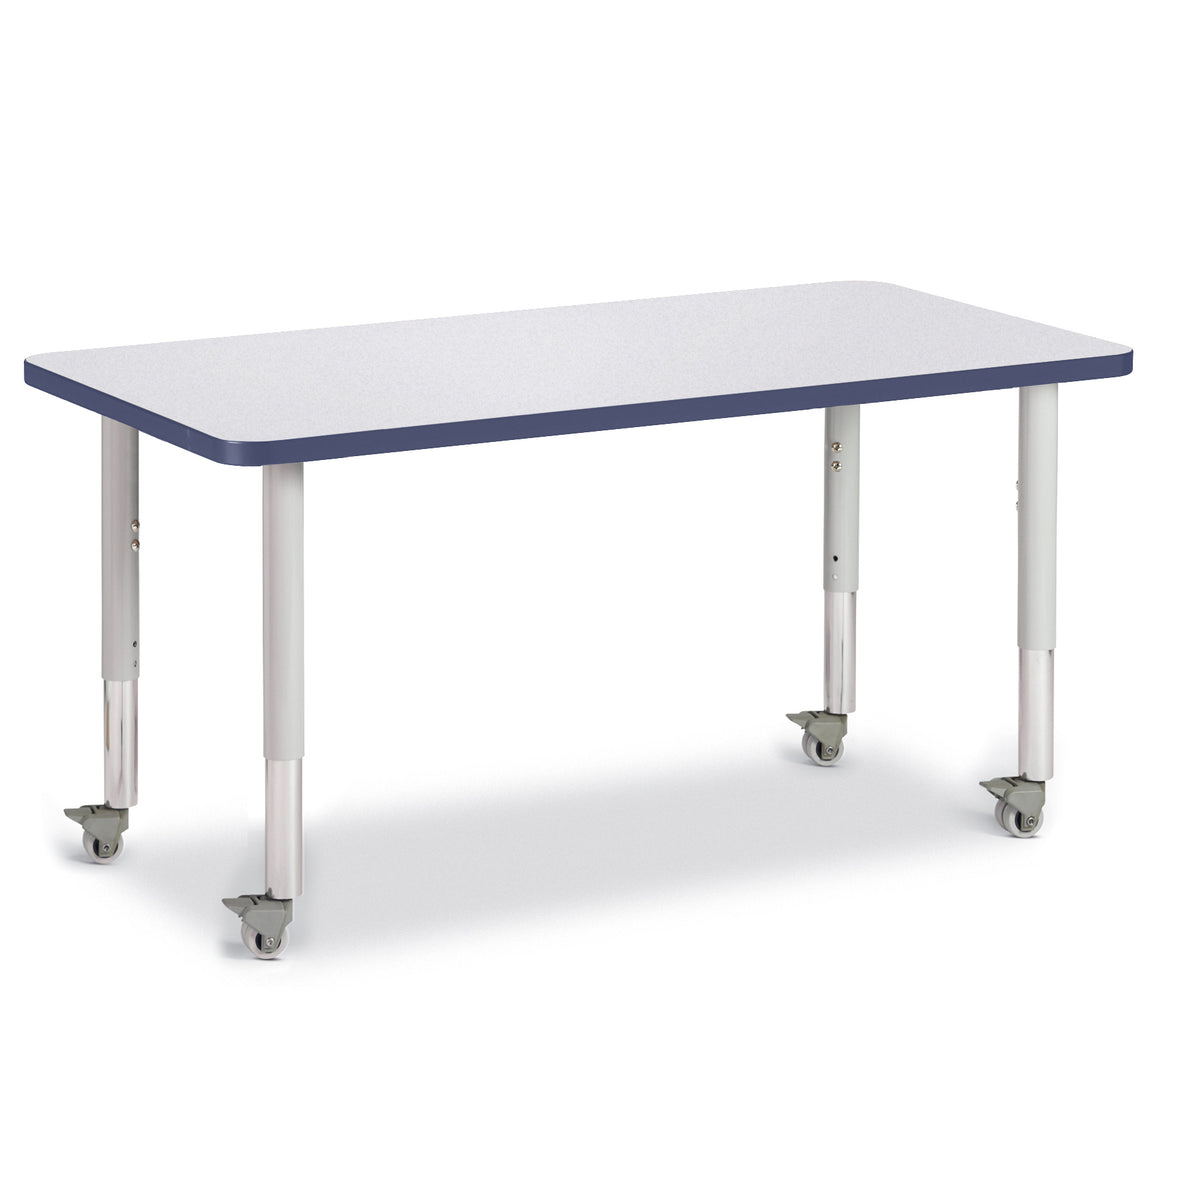 6403JCM112, Berries Rectangle Activity Table - 24" X 48", Mobile - Freckled Gray/Navy/Gray